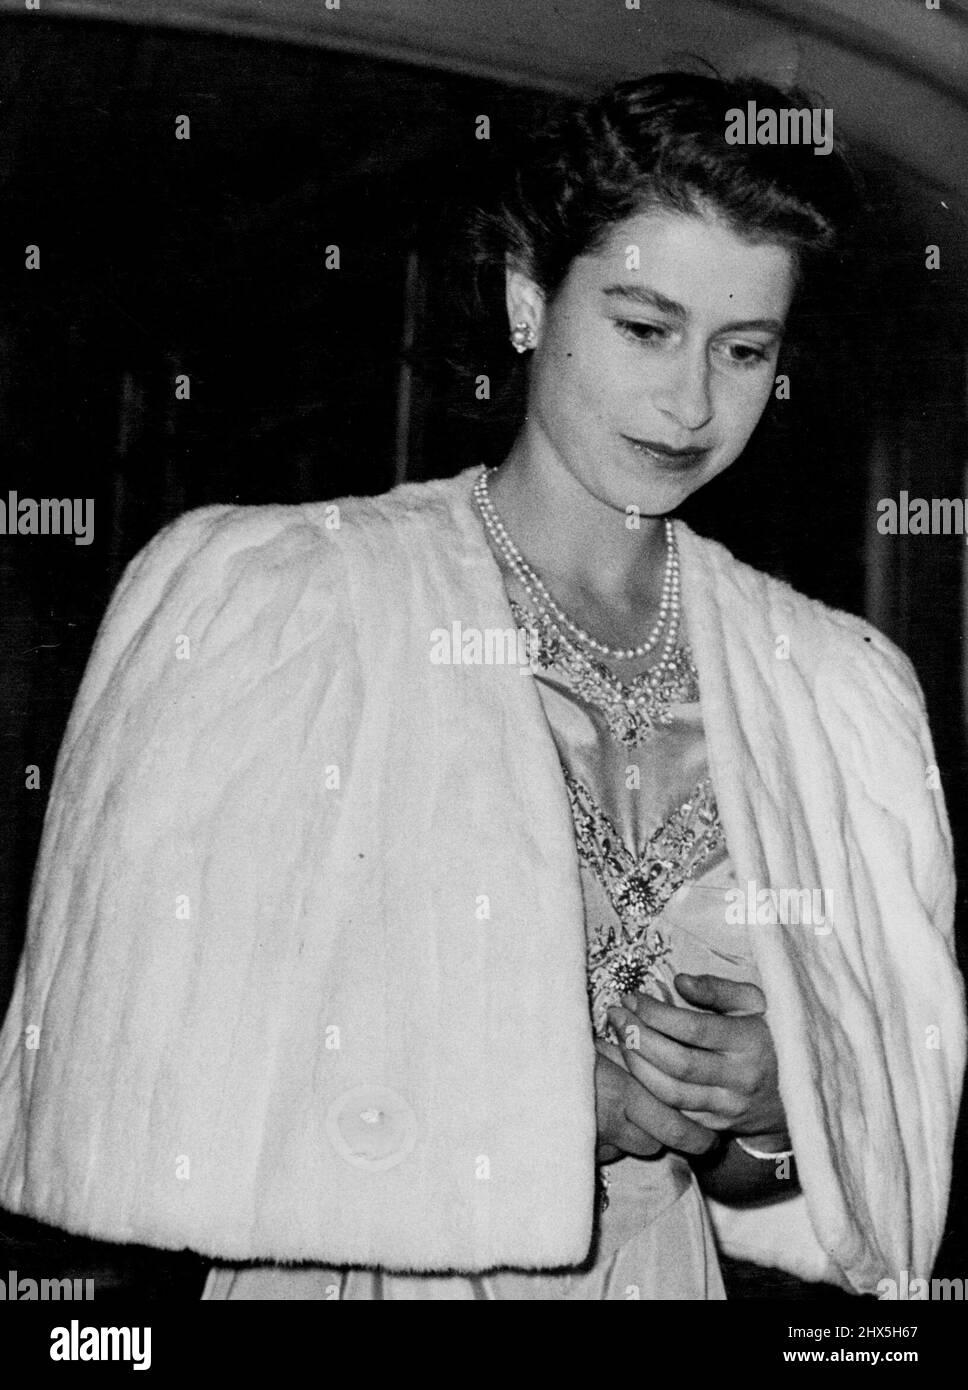 Princess Elizabeth And Lieutenant Philip Mountbatten To Wed; The Princess Attends Private Dinner Party at Dorchester Hotel. Princess Elizabeth - with folded hands - leaving the Dorchester Hotel after the dinner party. After the announcement of the engagement of Princess Elizabeth to Lieutenant Philip Mountbatten (formerly Prince Prince Philip of Greece) the Princess went to the Dorchester Hotel, in London, for a private dinner party - and later the party went to Apsley House, for dancing. July 9, 1947. Stock Photo